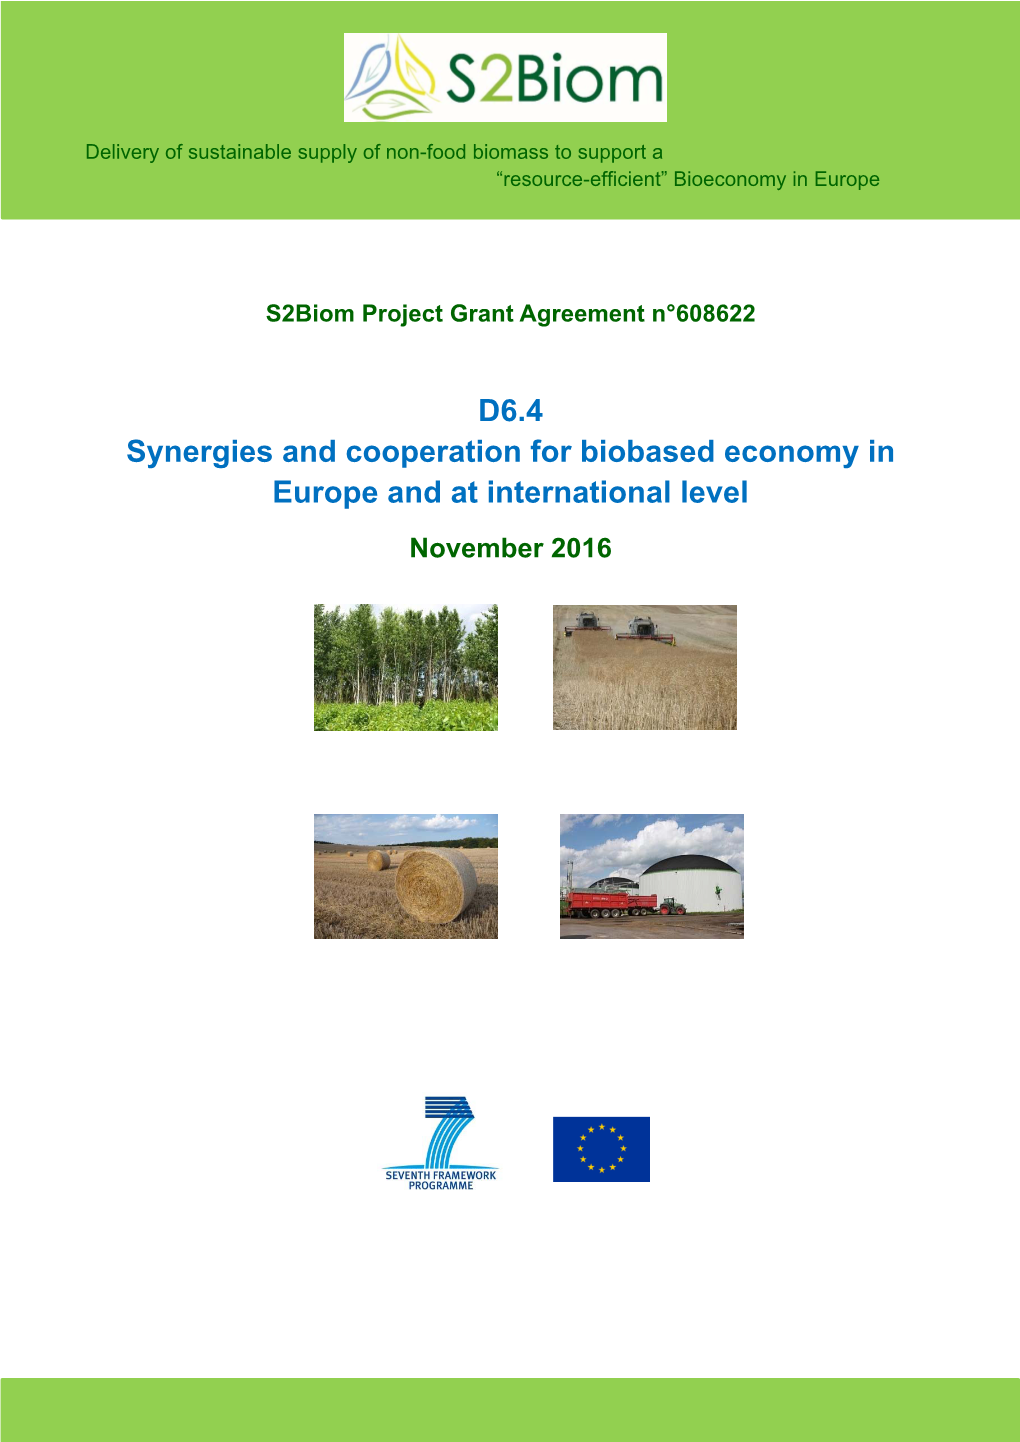 D6.4 Synergies and Cooperation for Biobased Economy in Europe and at International Level November 2016